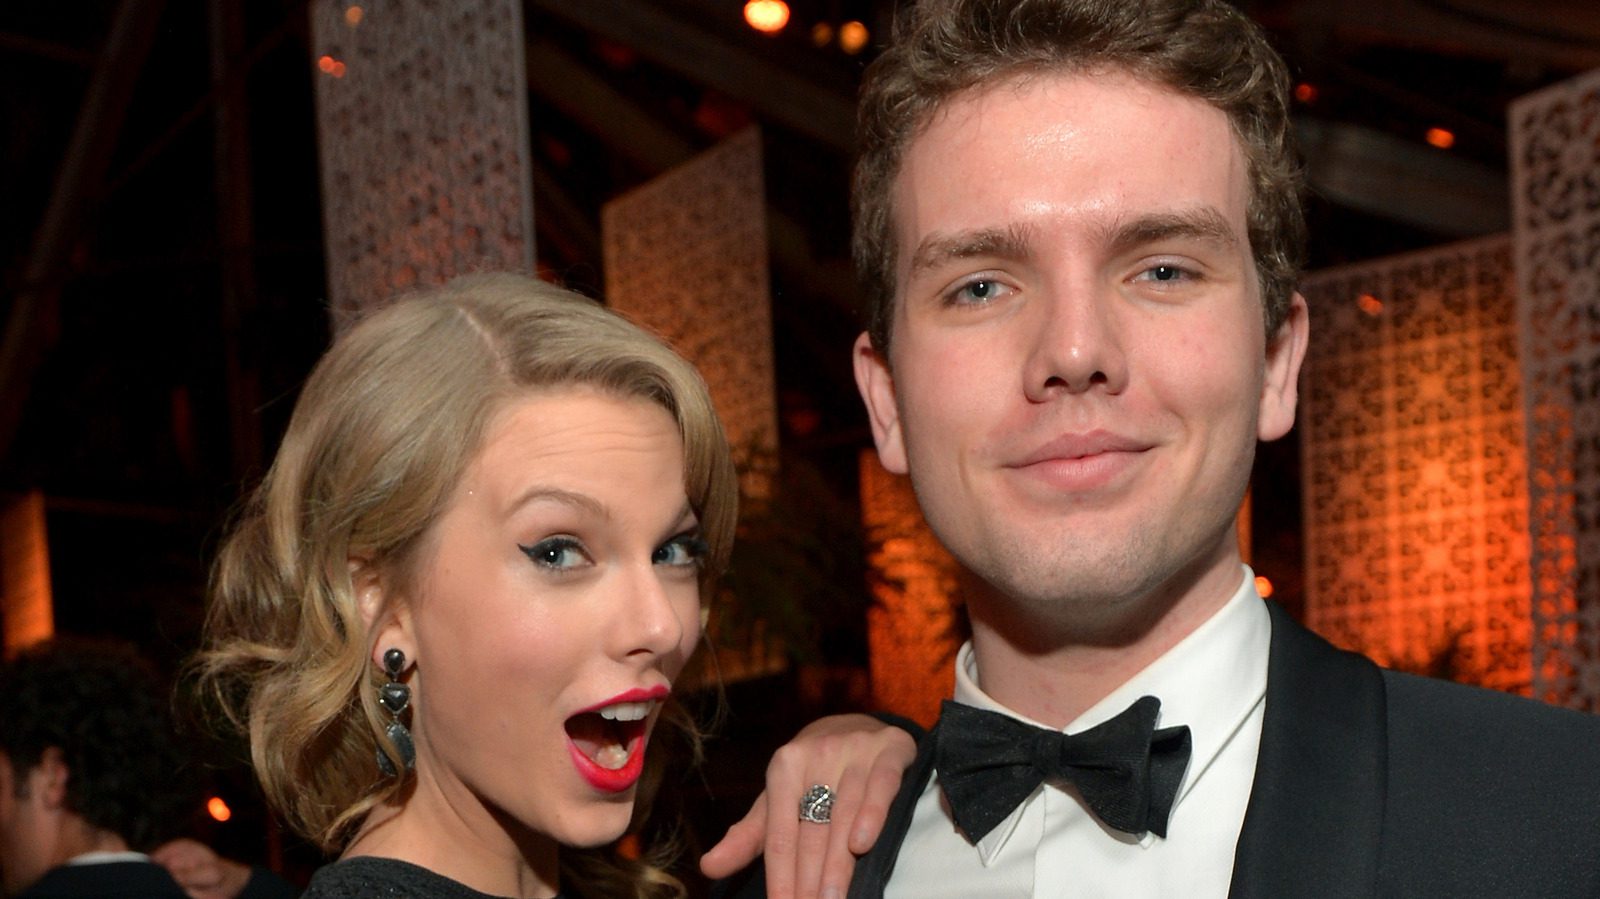 Who Is Taylor Swift's Brother & What Movies Or TV Shows Have You Seen Him In?